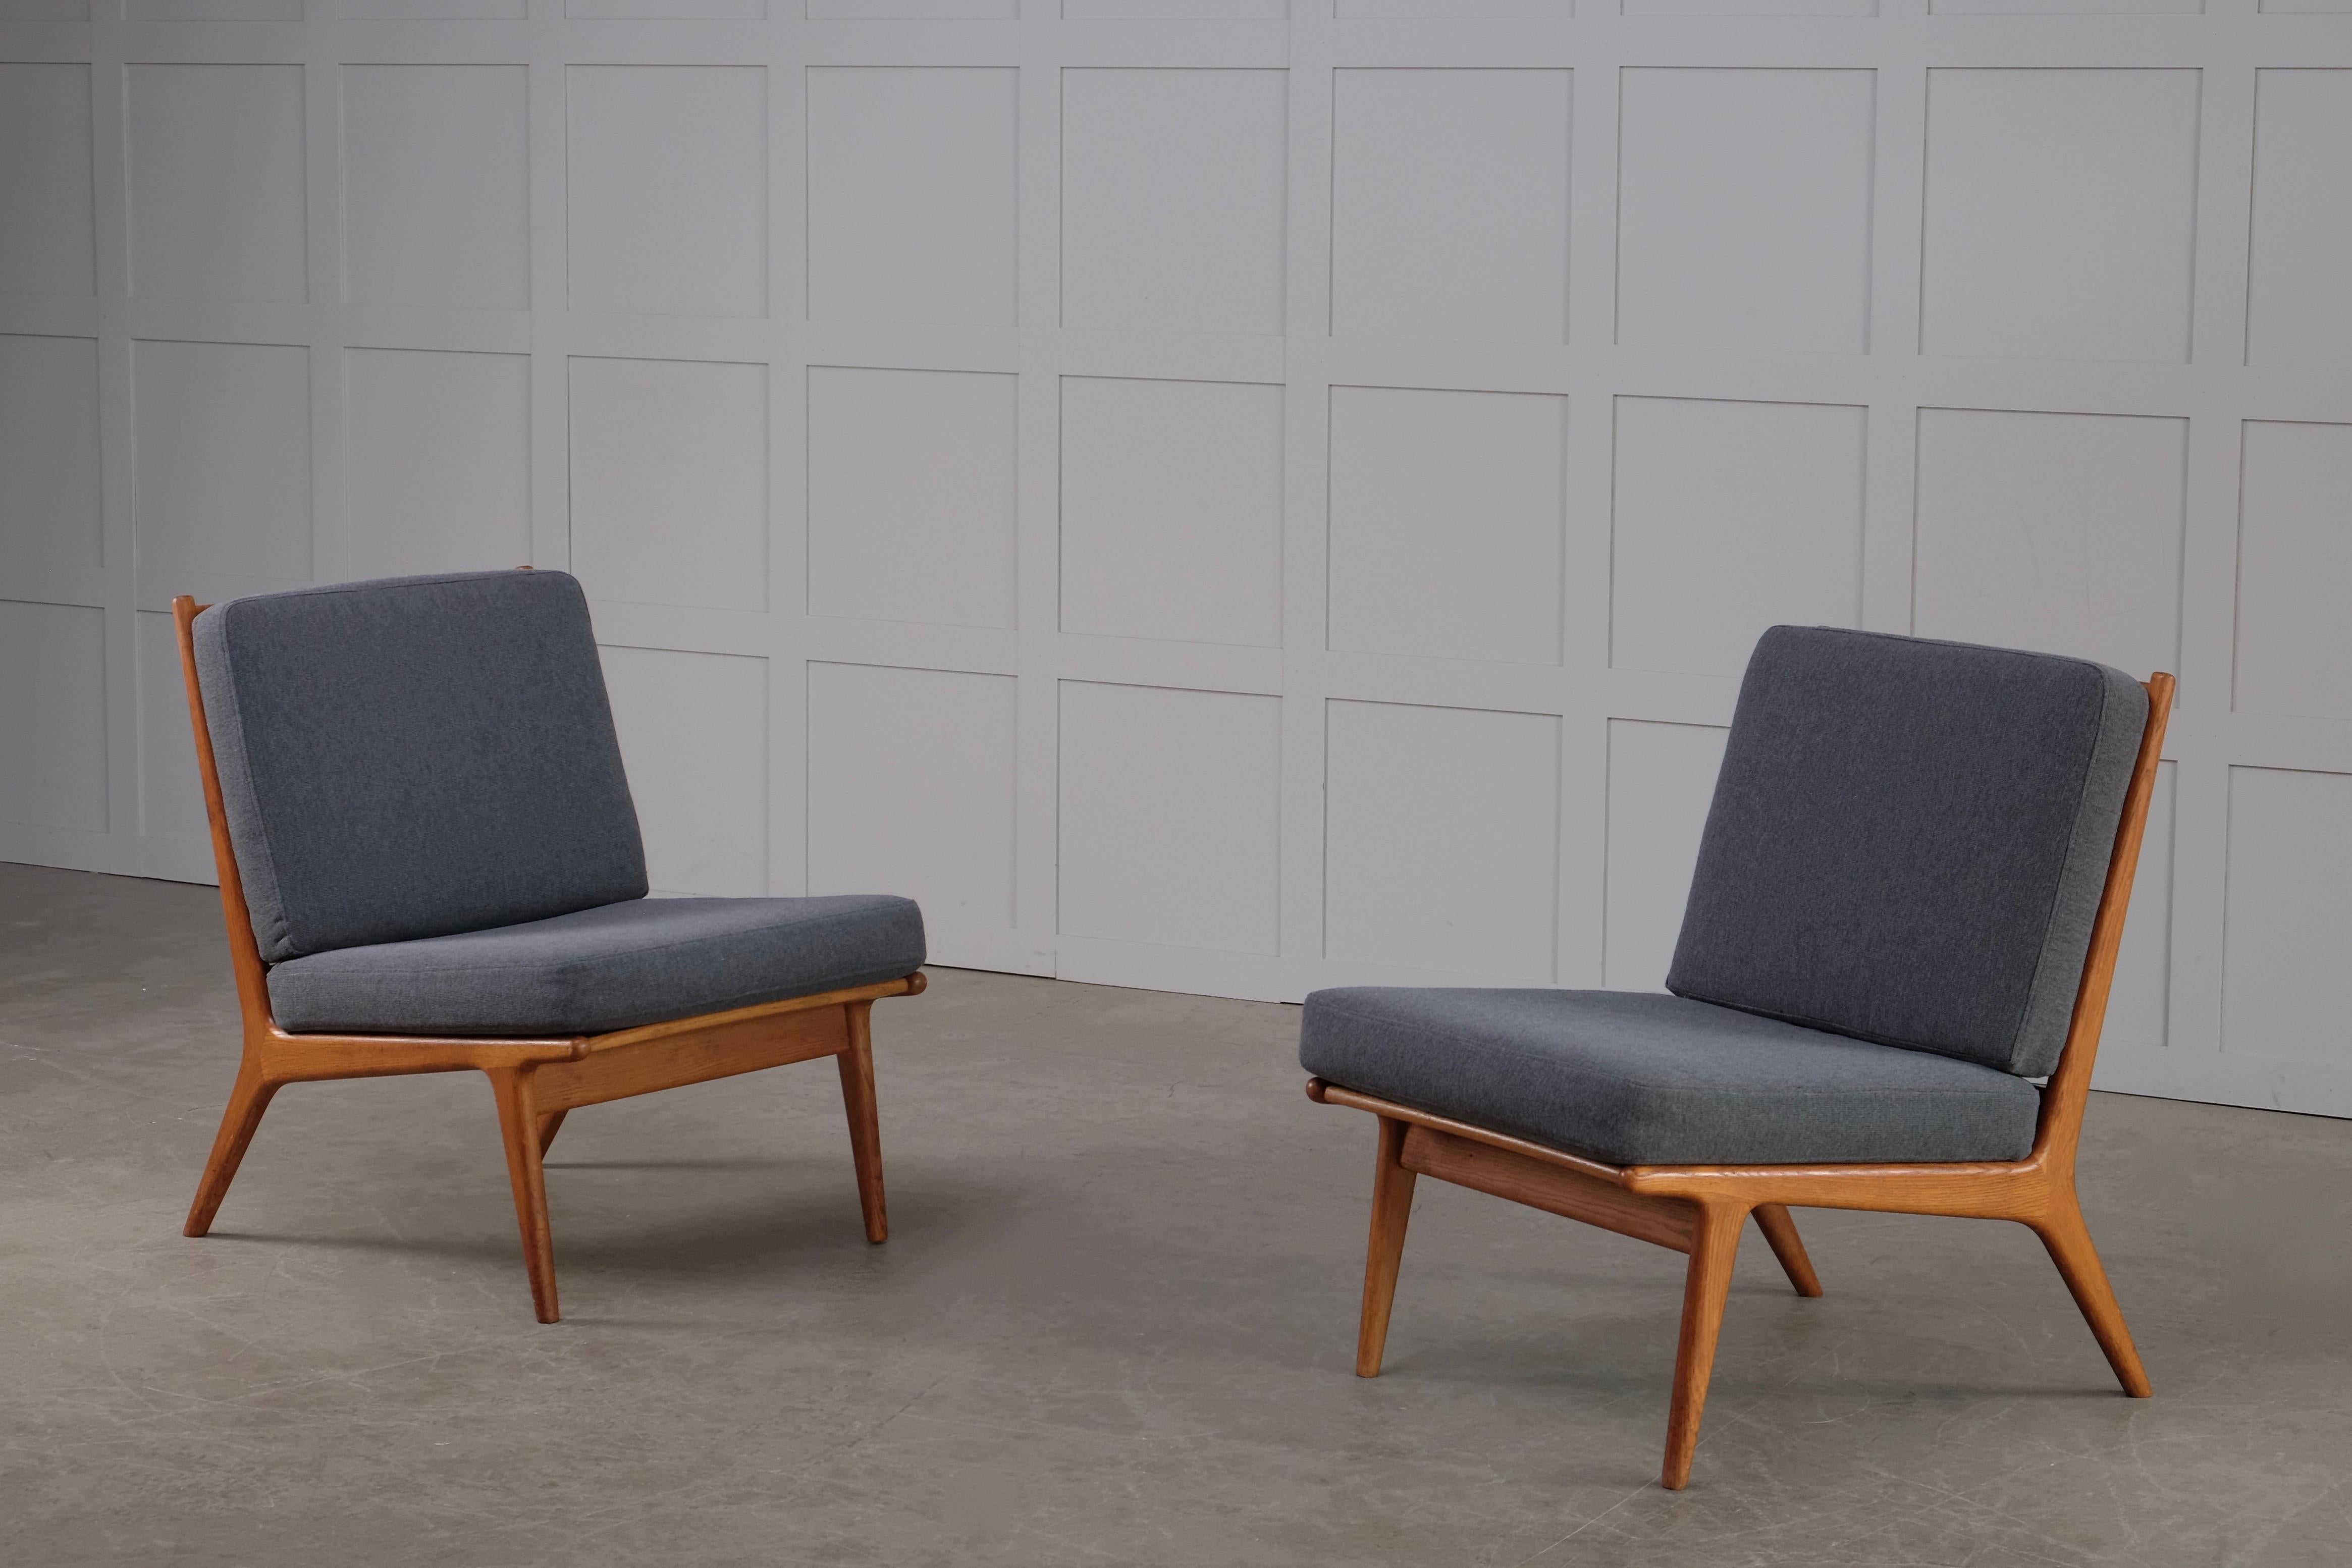 Rare model. Designed by Karl-Erik Ekselius, produced by JOC in Vetlanda, Sweden, 1960s.
Solid oak frame and newly upholstered cushions in wool fabric.
Set of 5 chairs available. Listed price is for a pair.
  